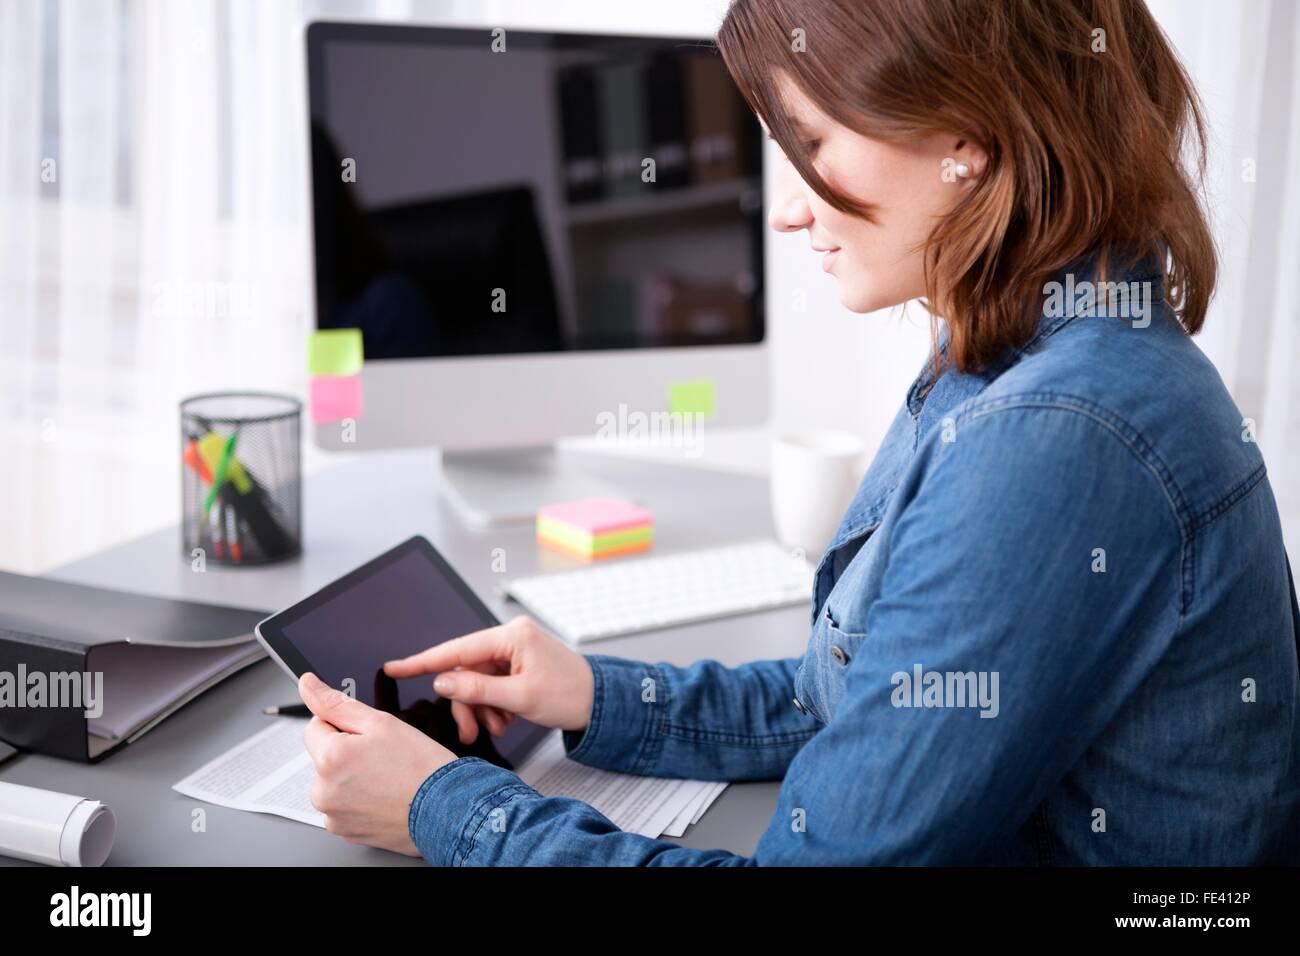 Side view of an attractive young businesswoman surfing the internet on her tablet computer as she sits at the desk Stock Photo